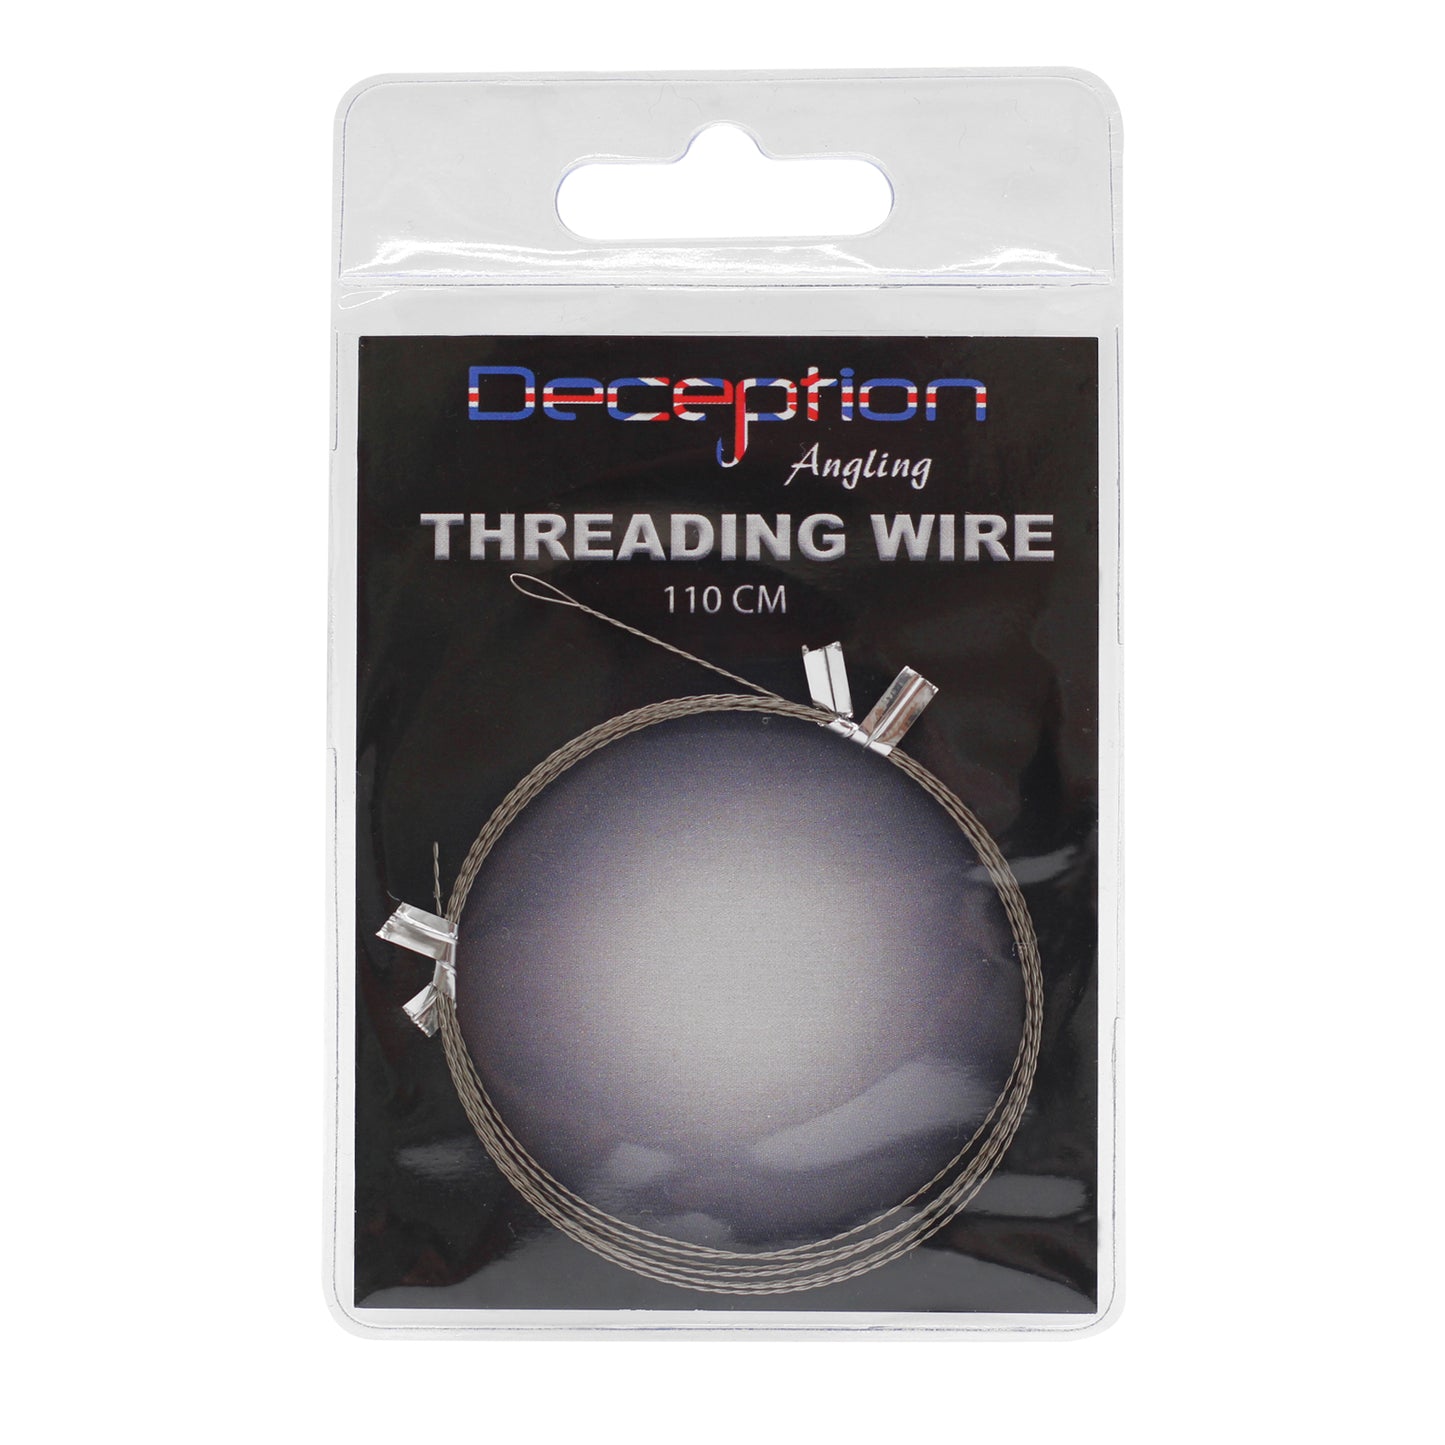 Threading Wire 110cm by Deception Angling